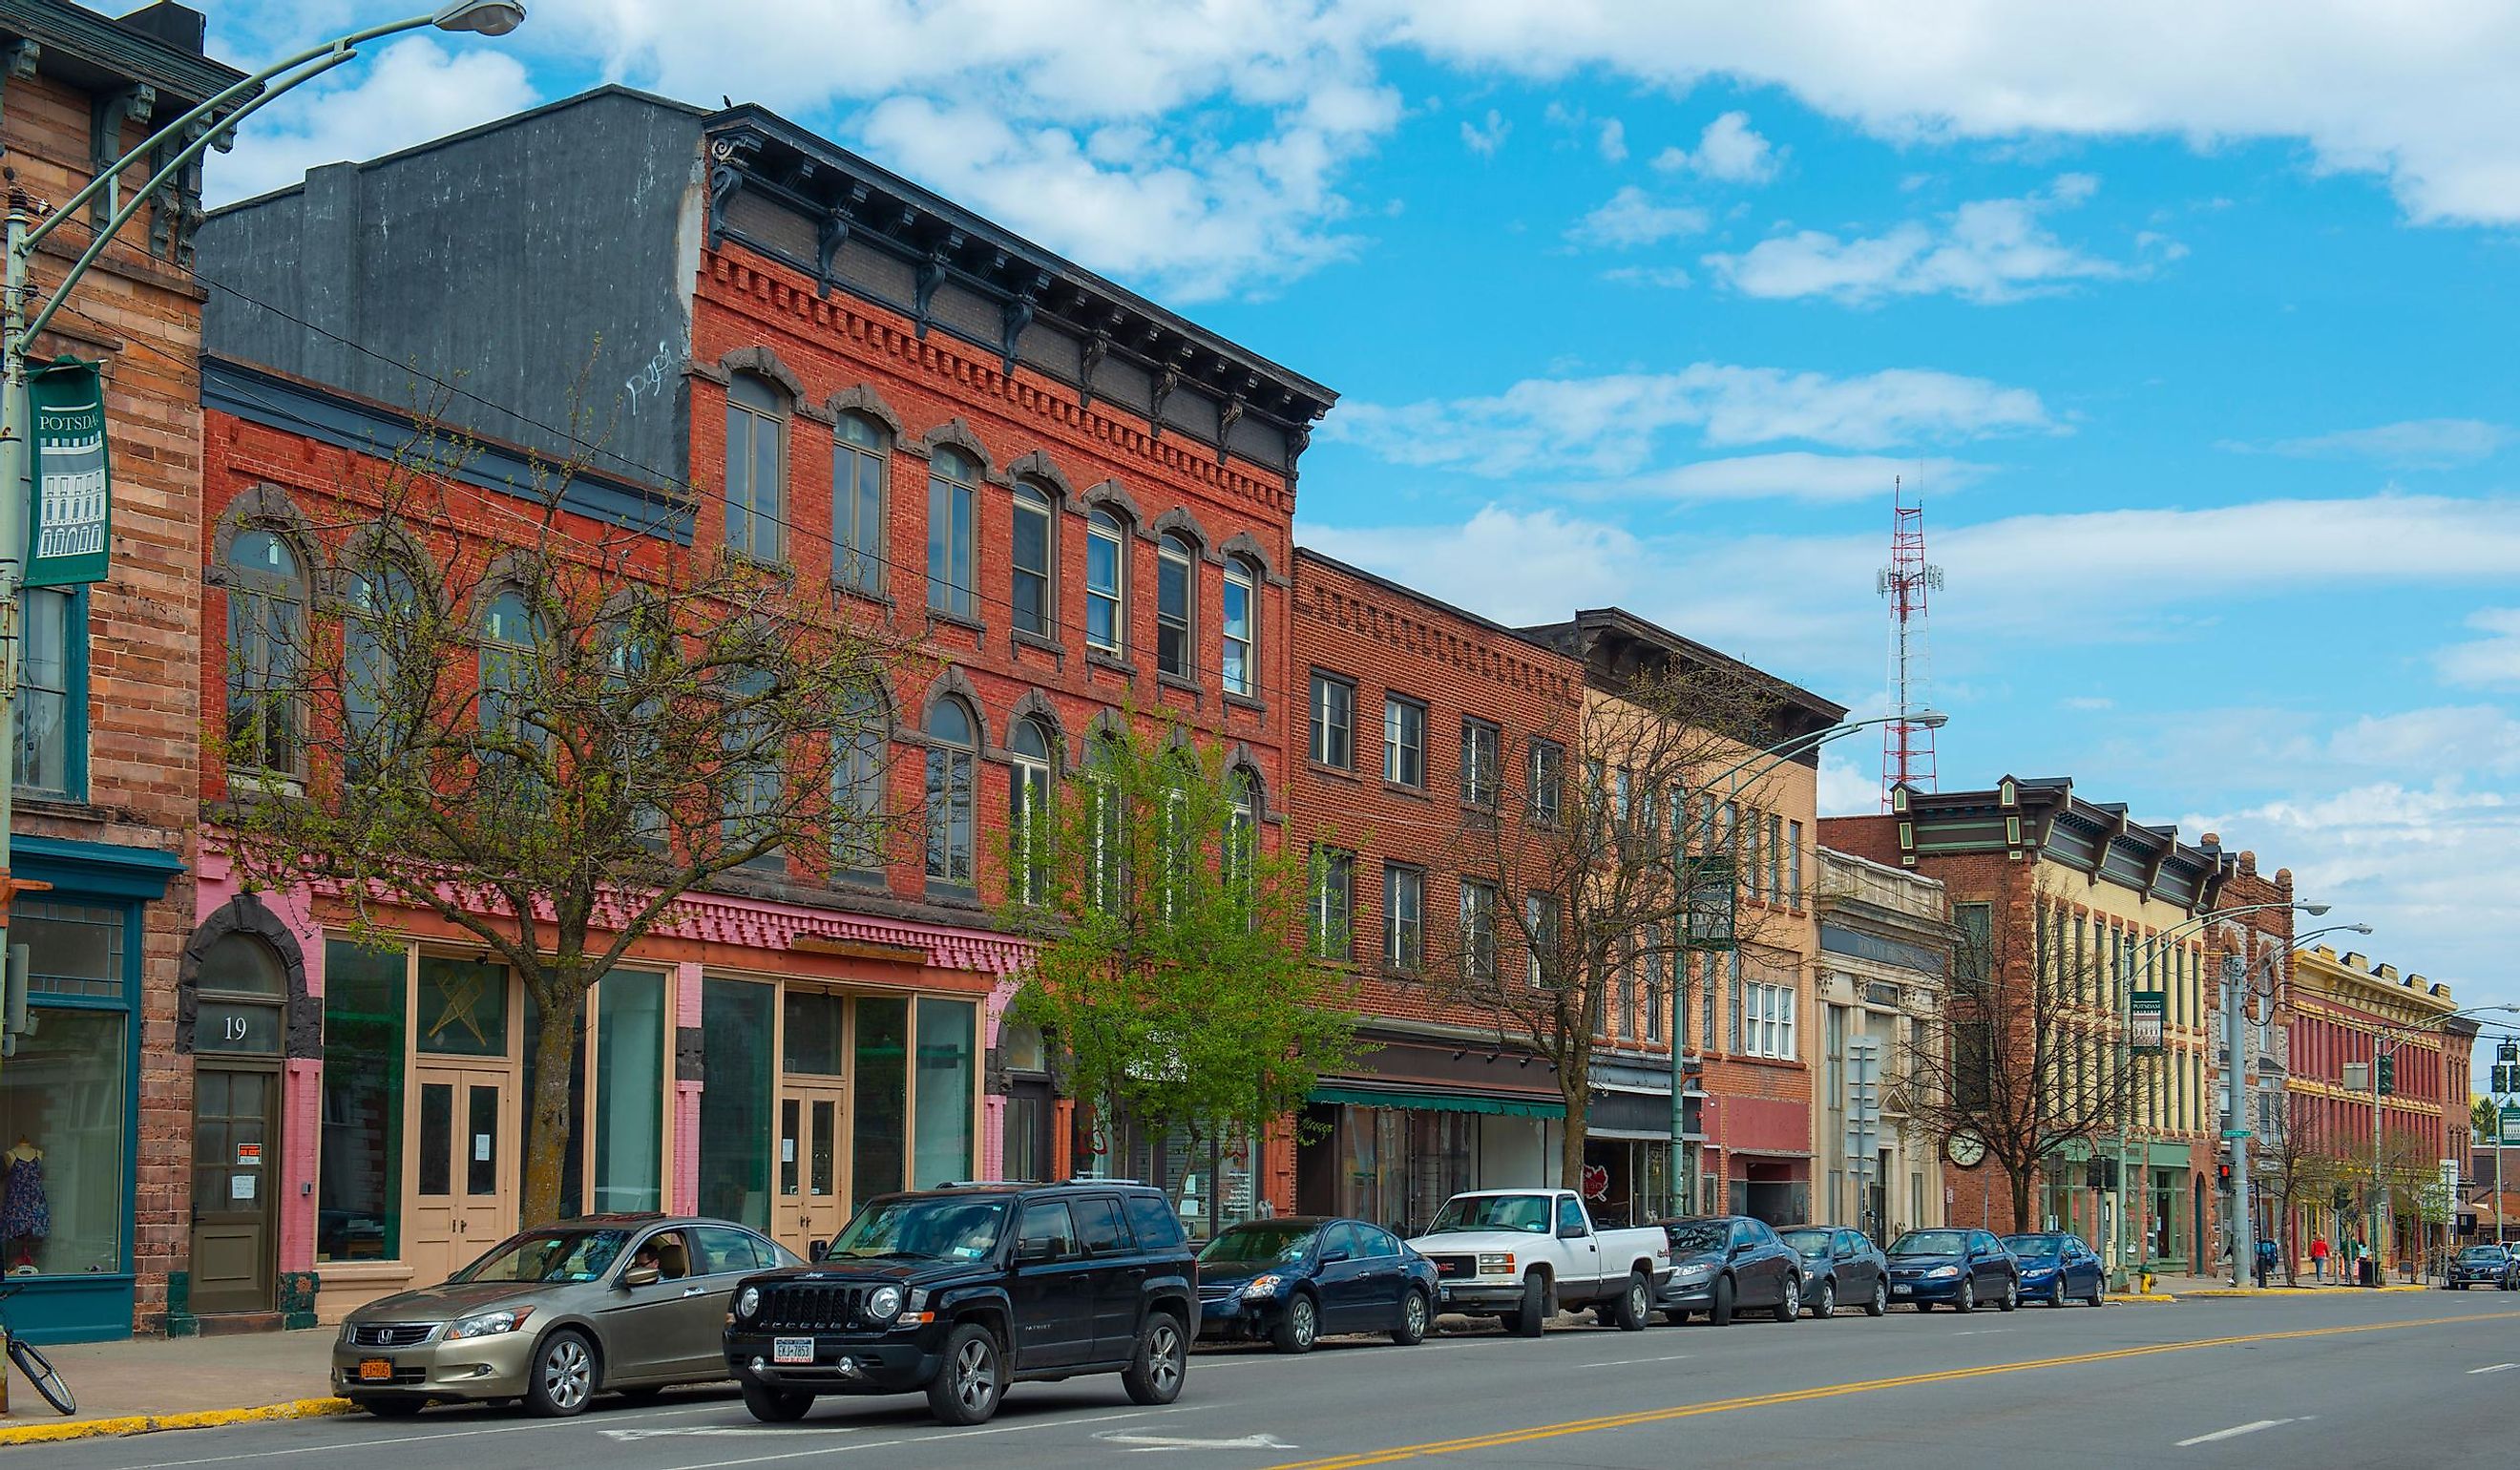 Historic sandstone and brick commercial buildings with Italianate style on Market Street at Main Street in downtown Potsdam, Upstate New York NY, USA. Editorial credit: Wangkun Jia / Shutterstock.com